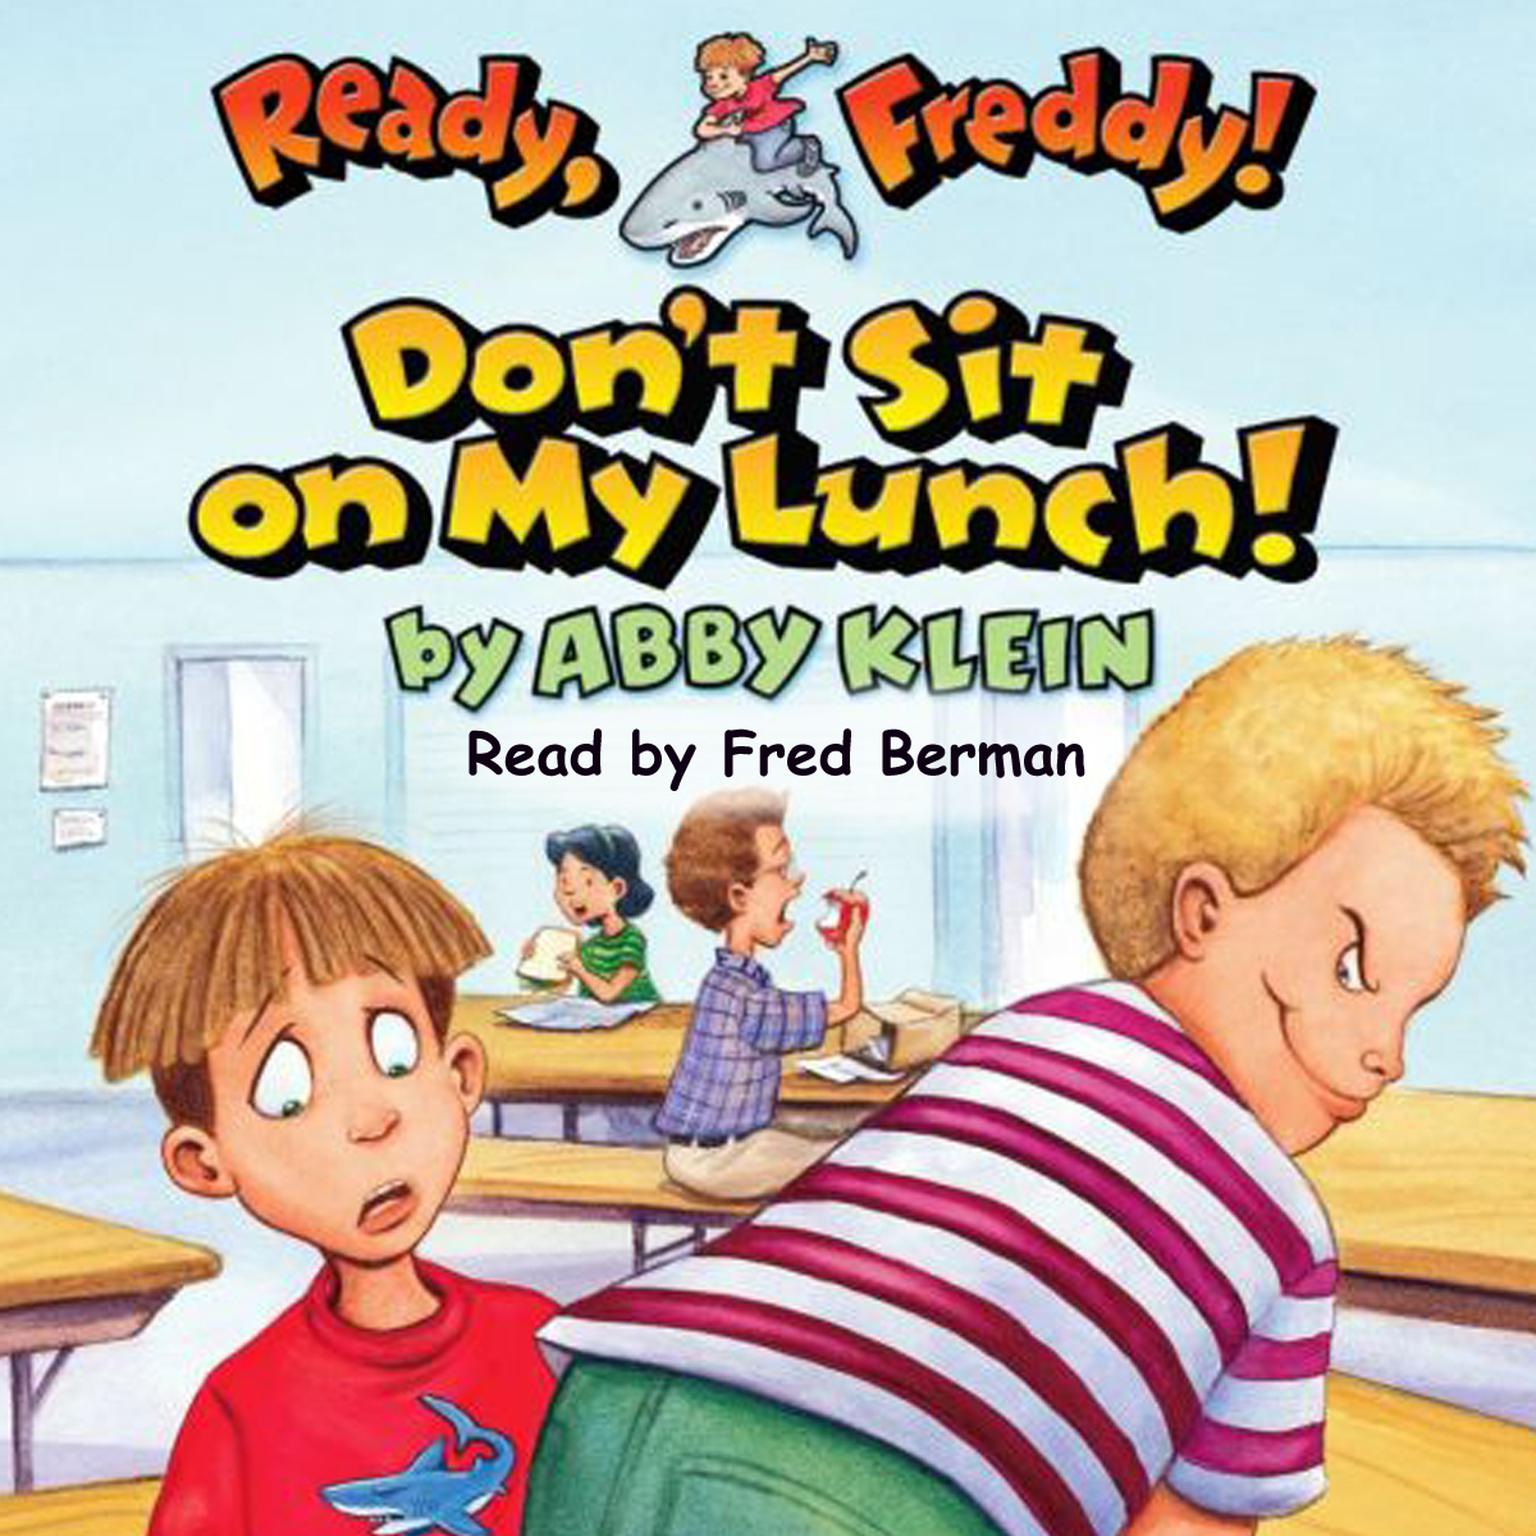 Dont Sit on My Lunch (Ready, Freddy! #4) Audiobook, by Abby Klein